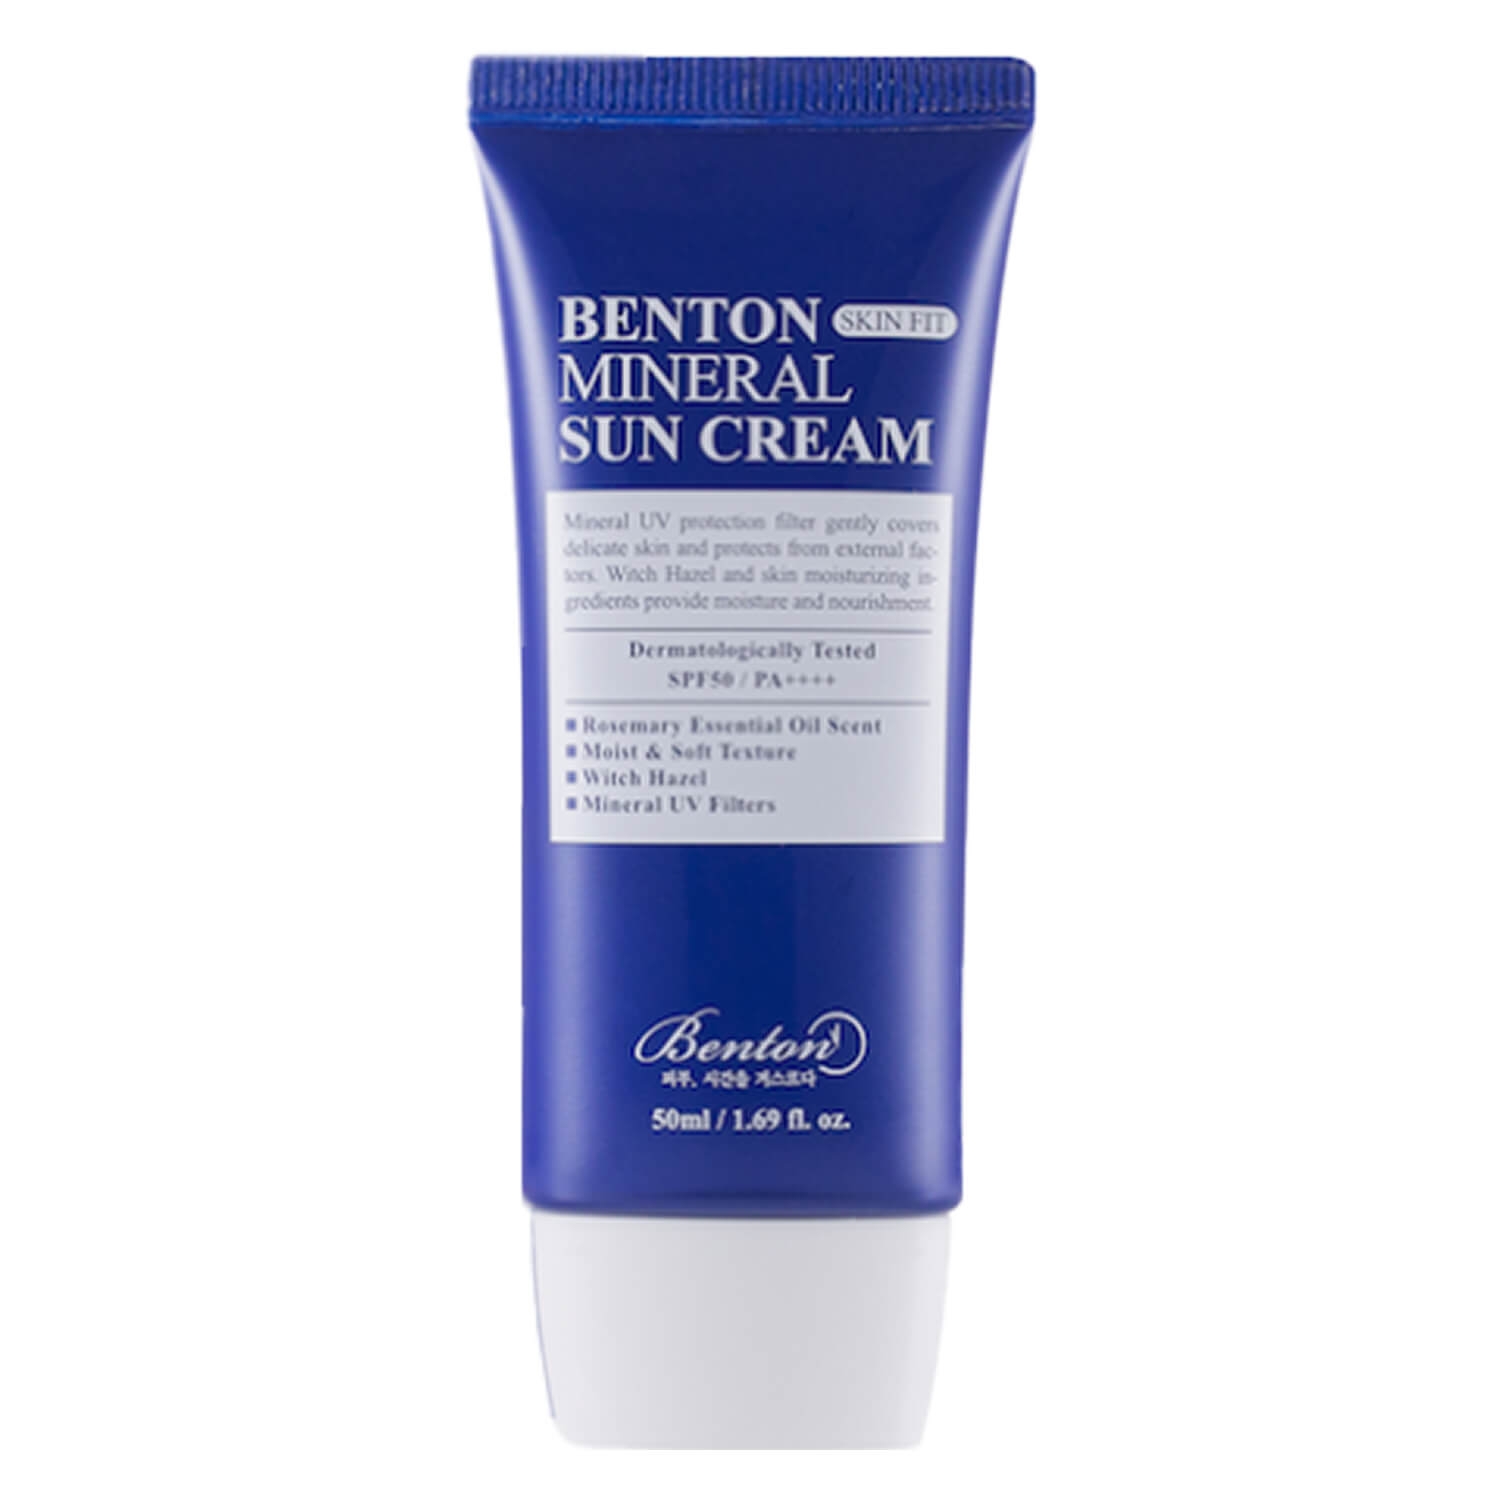 Product image from Benton - Skin Fit Mineral Sun Cream SPF 50+